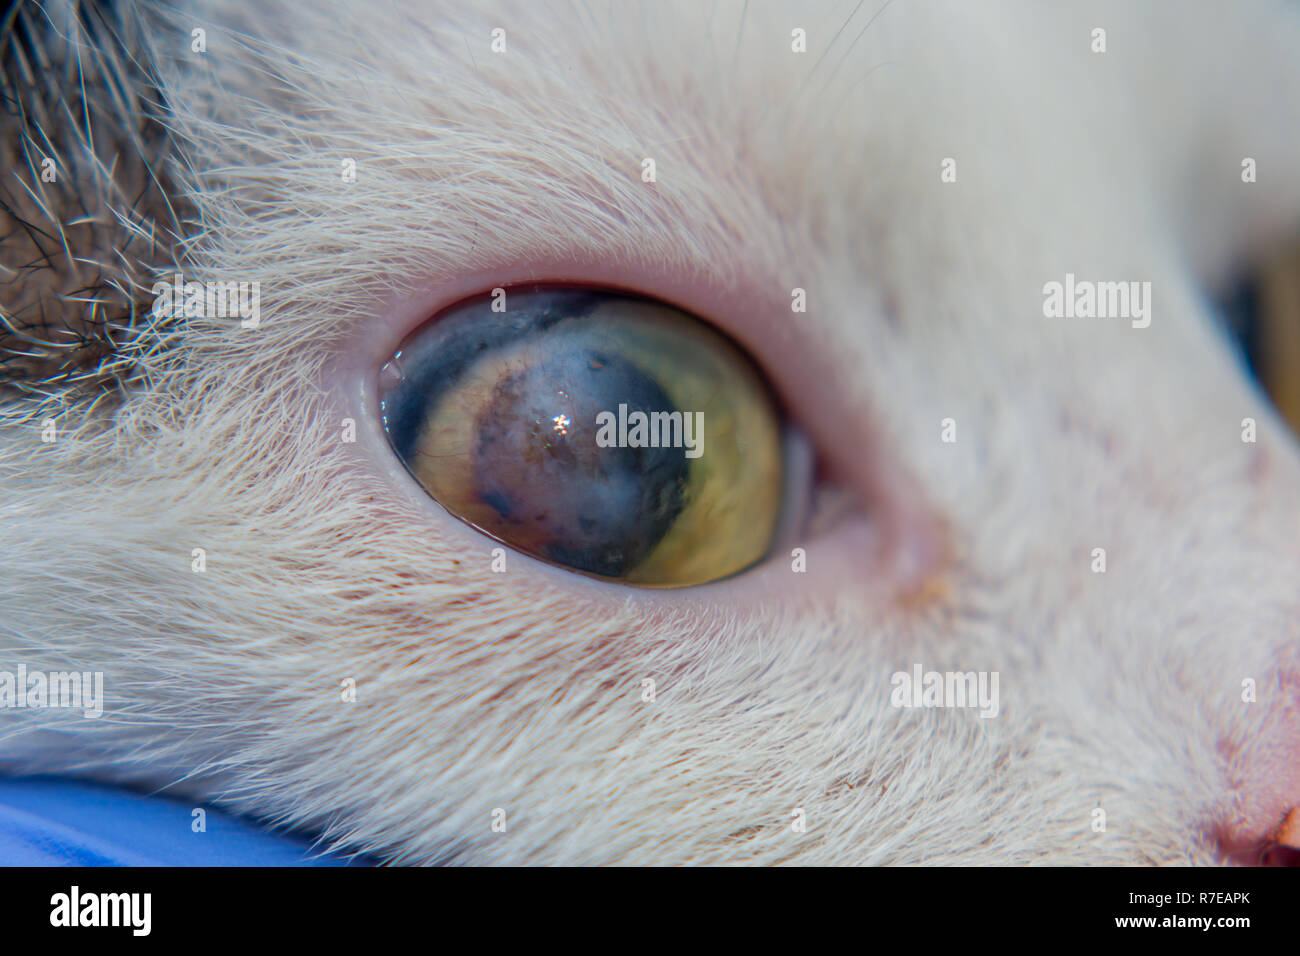 Adult cat with corneal ulcer Stock Photo